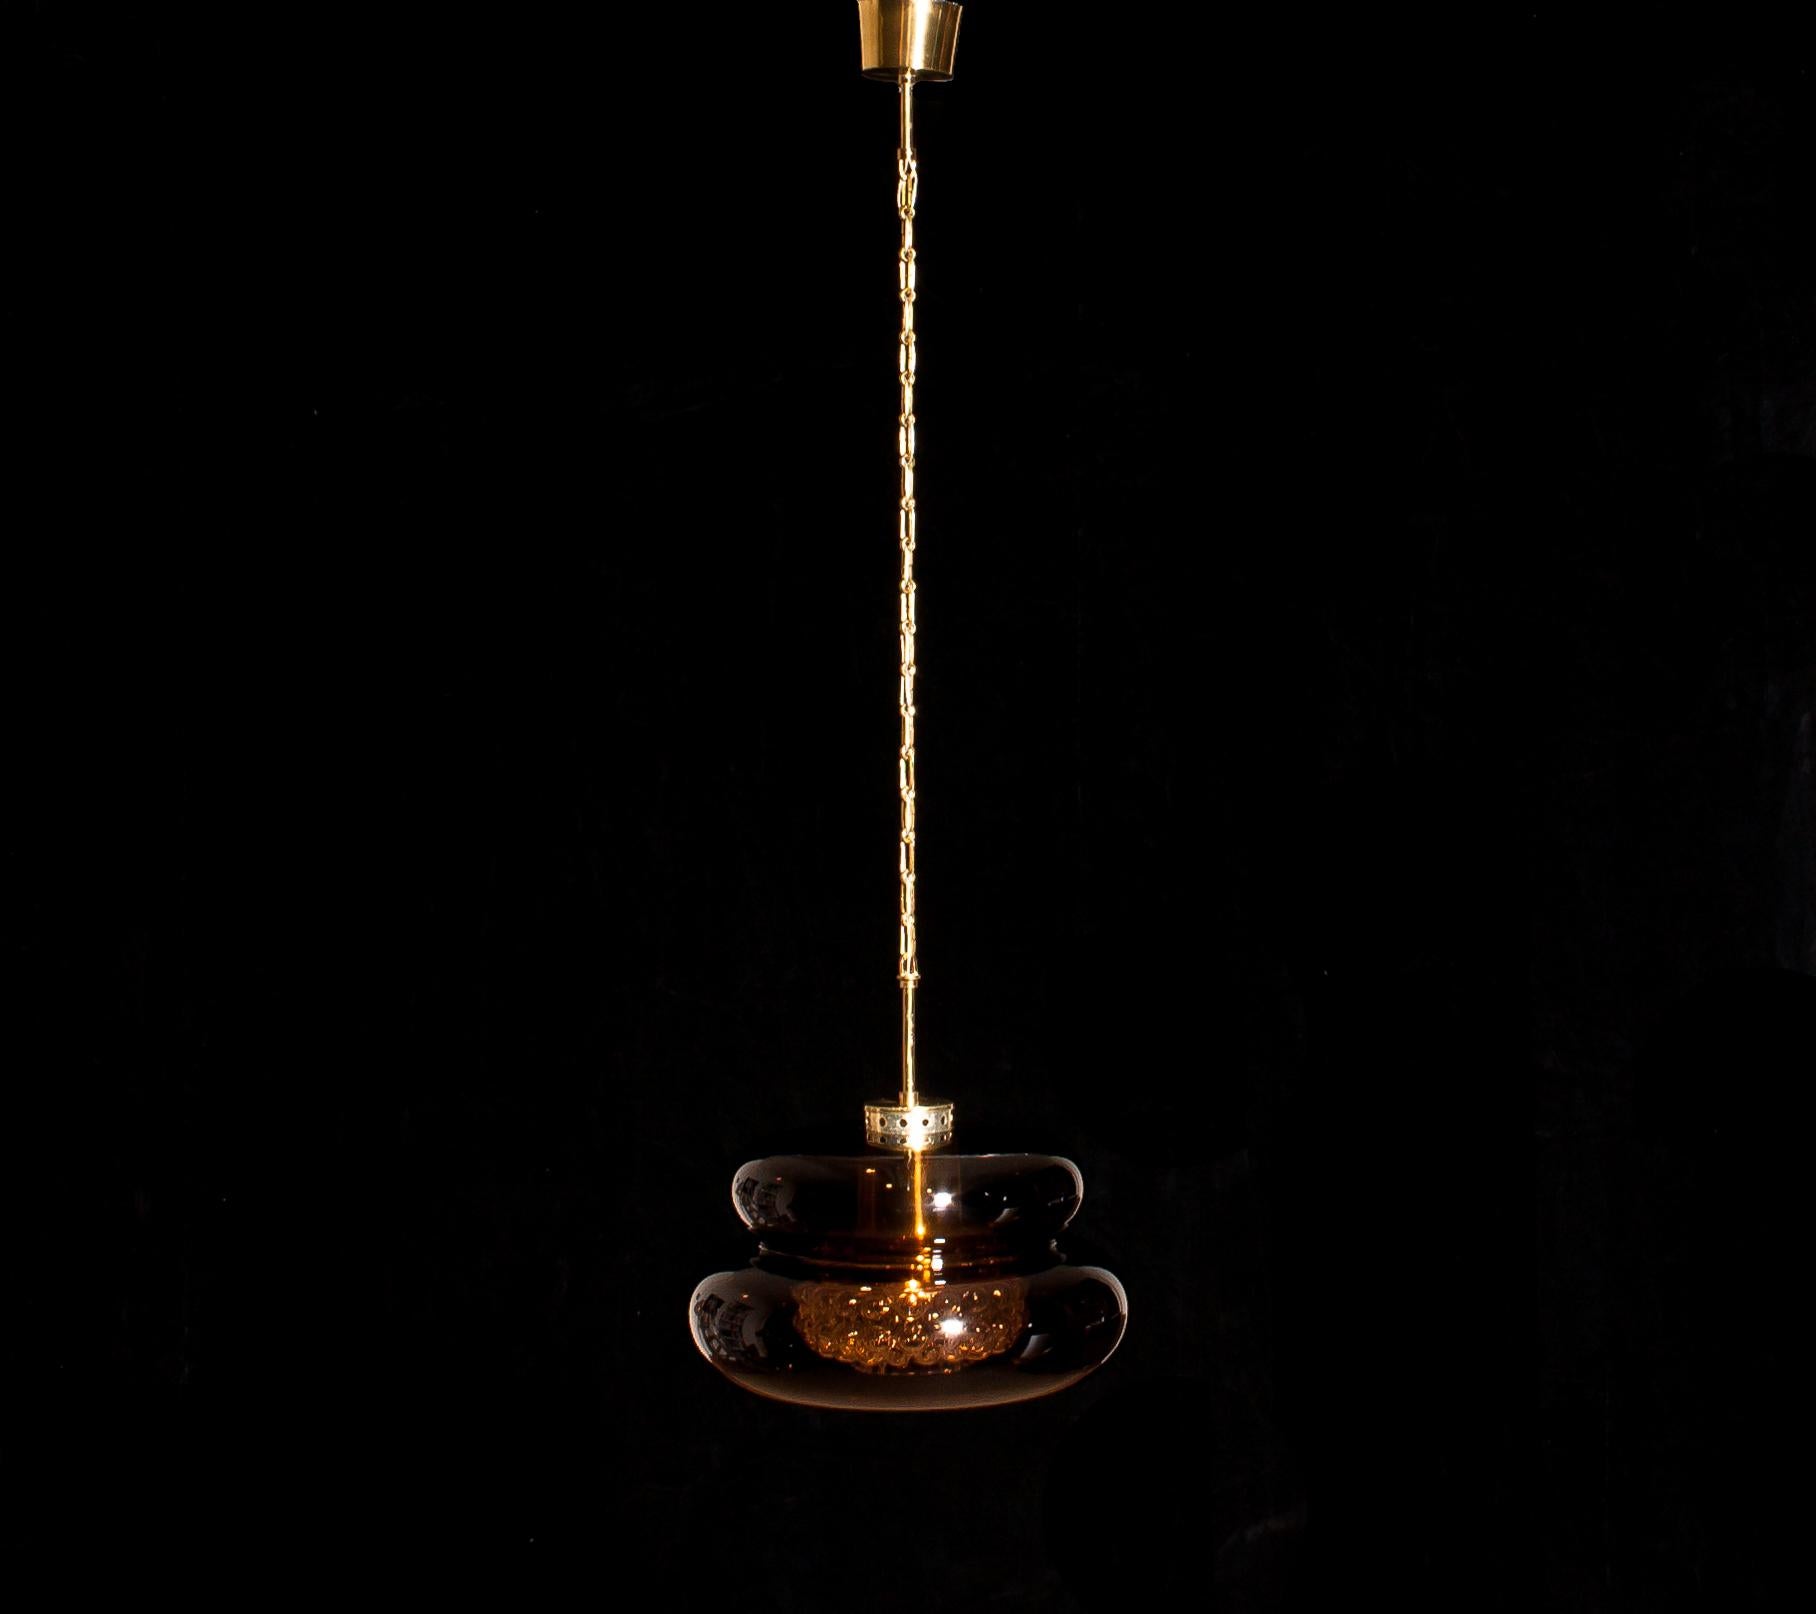 Beautiful pendant 'Bubblan' designed by Carl Fagerlund for Orrefors Sweden.
This lamp has a shade of brown smoked glass on the outside with a clear bubbled glass cylinder on the inside and it has brass details.
It is in wonderful condition,
circa